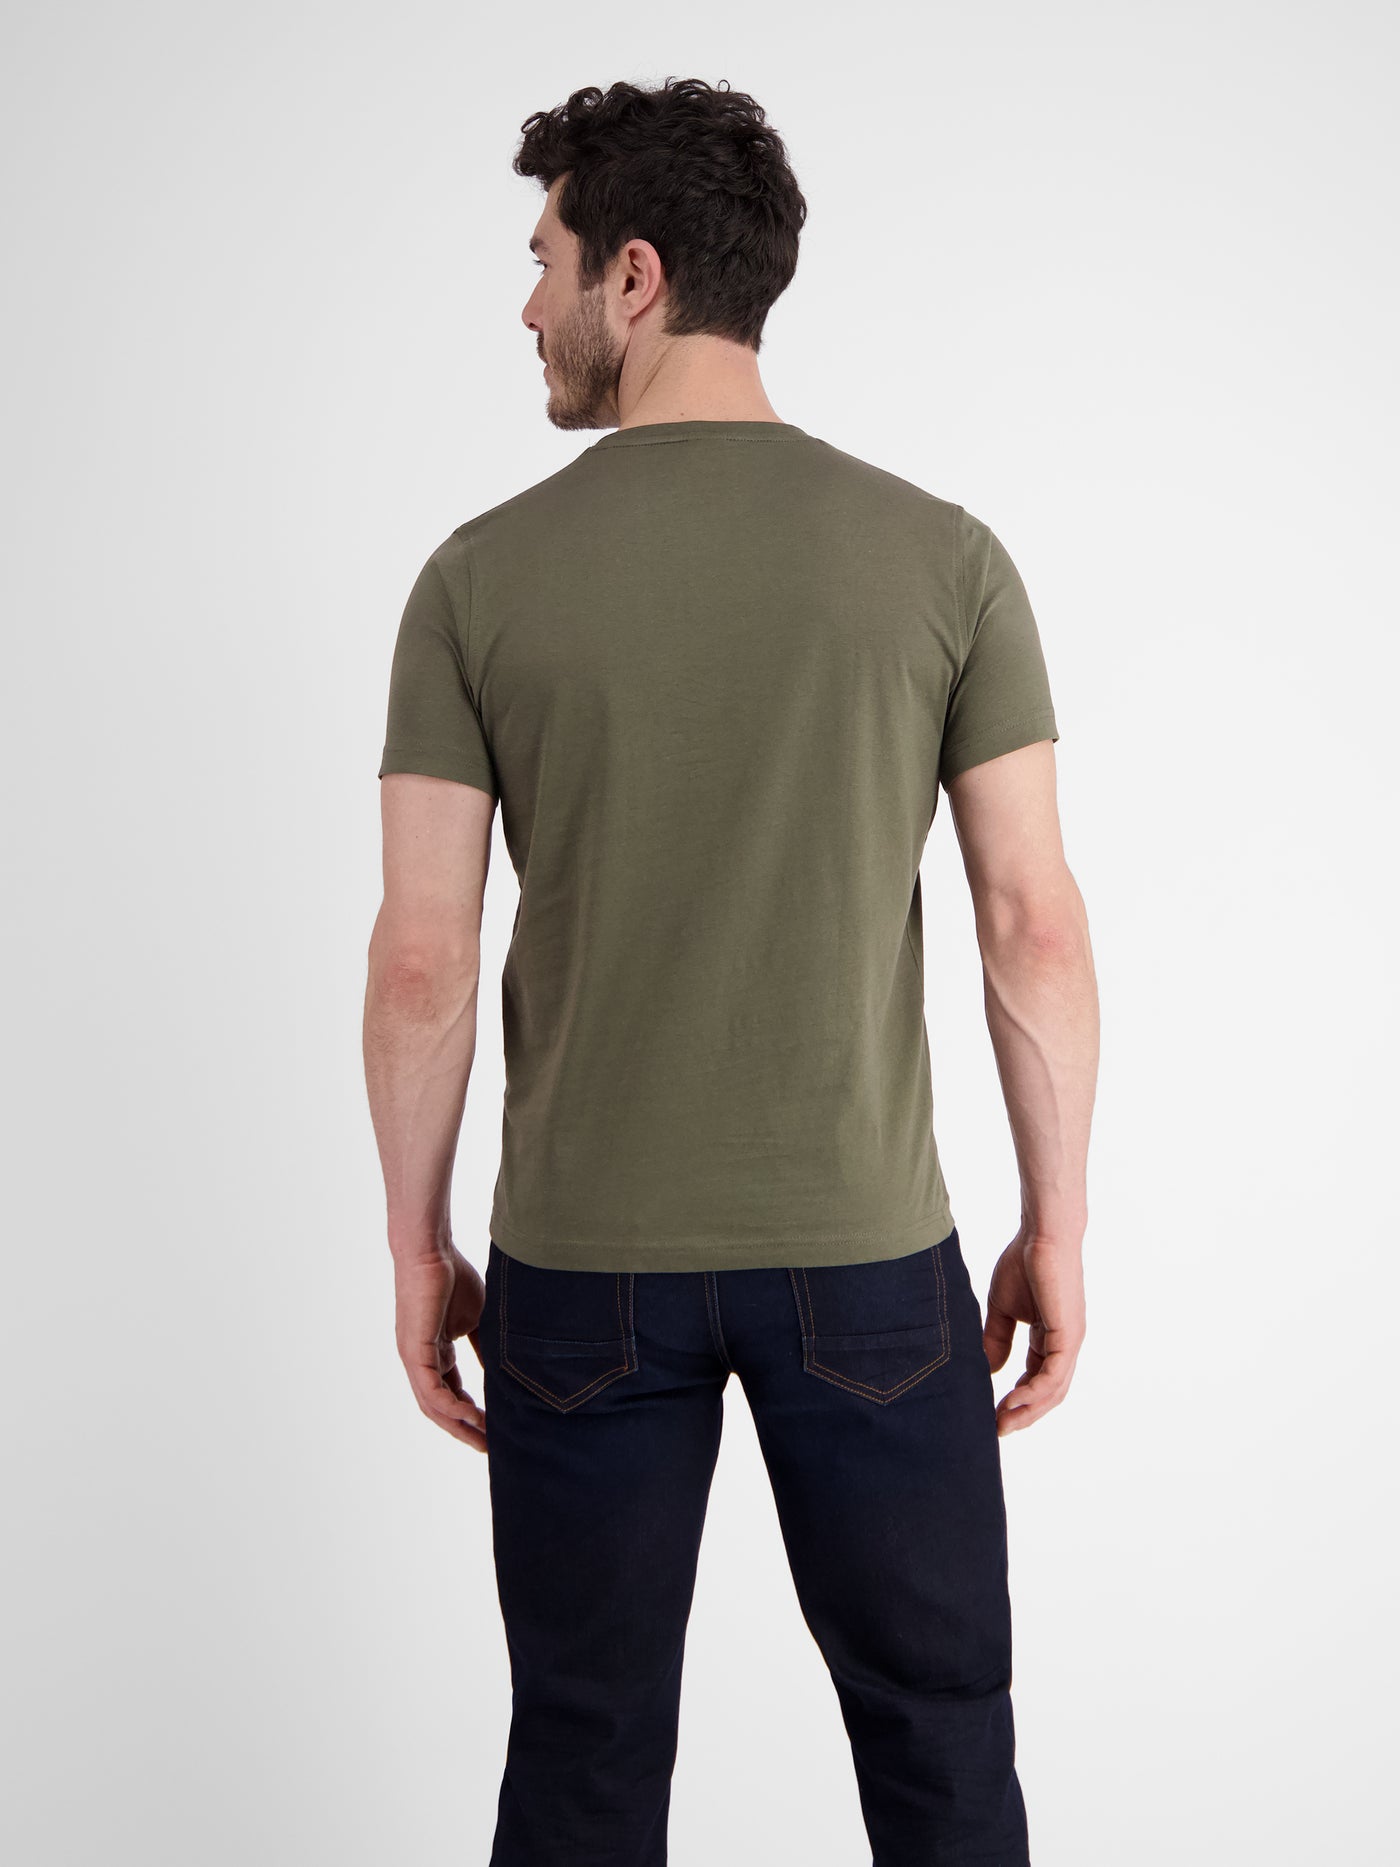 Basic T-shirt in many colors